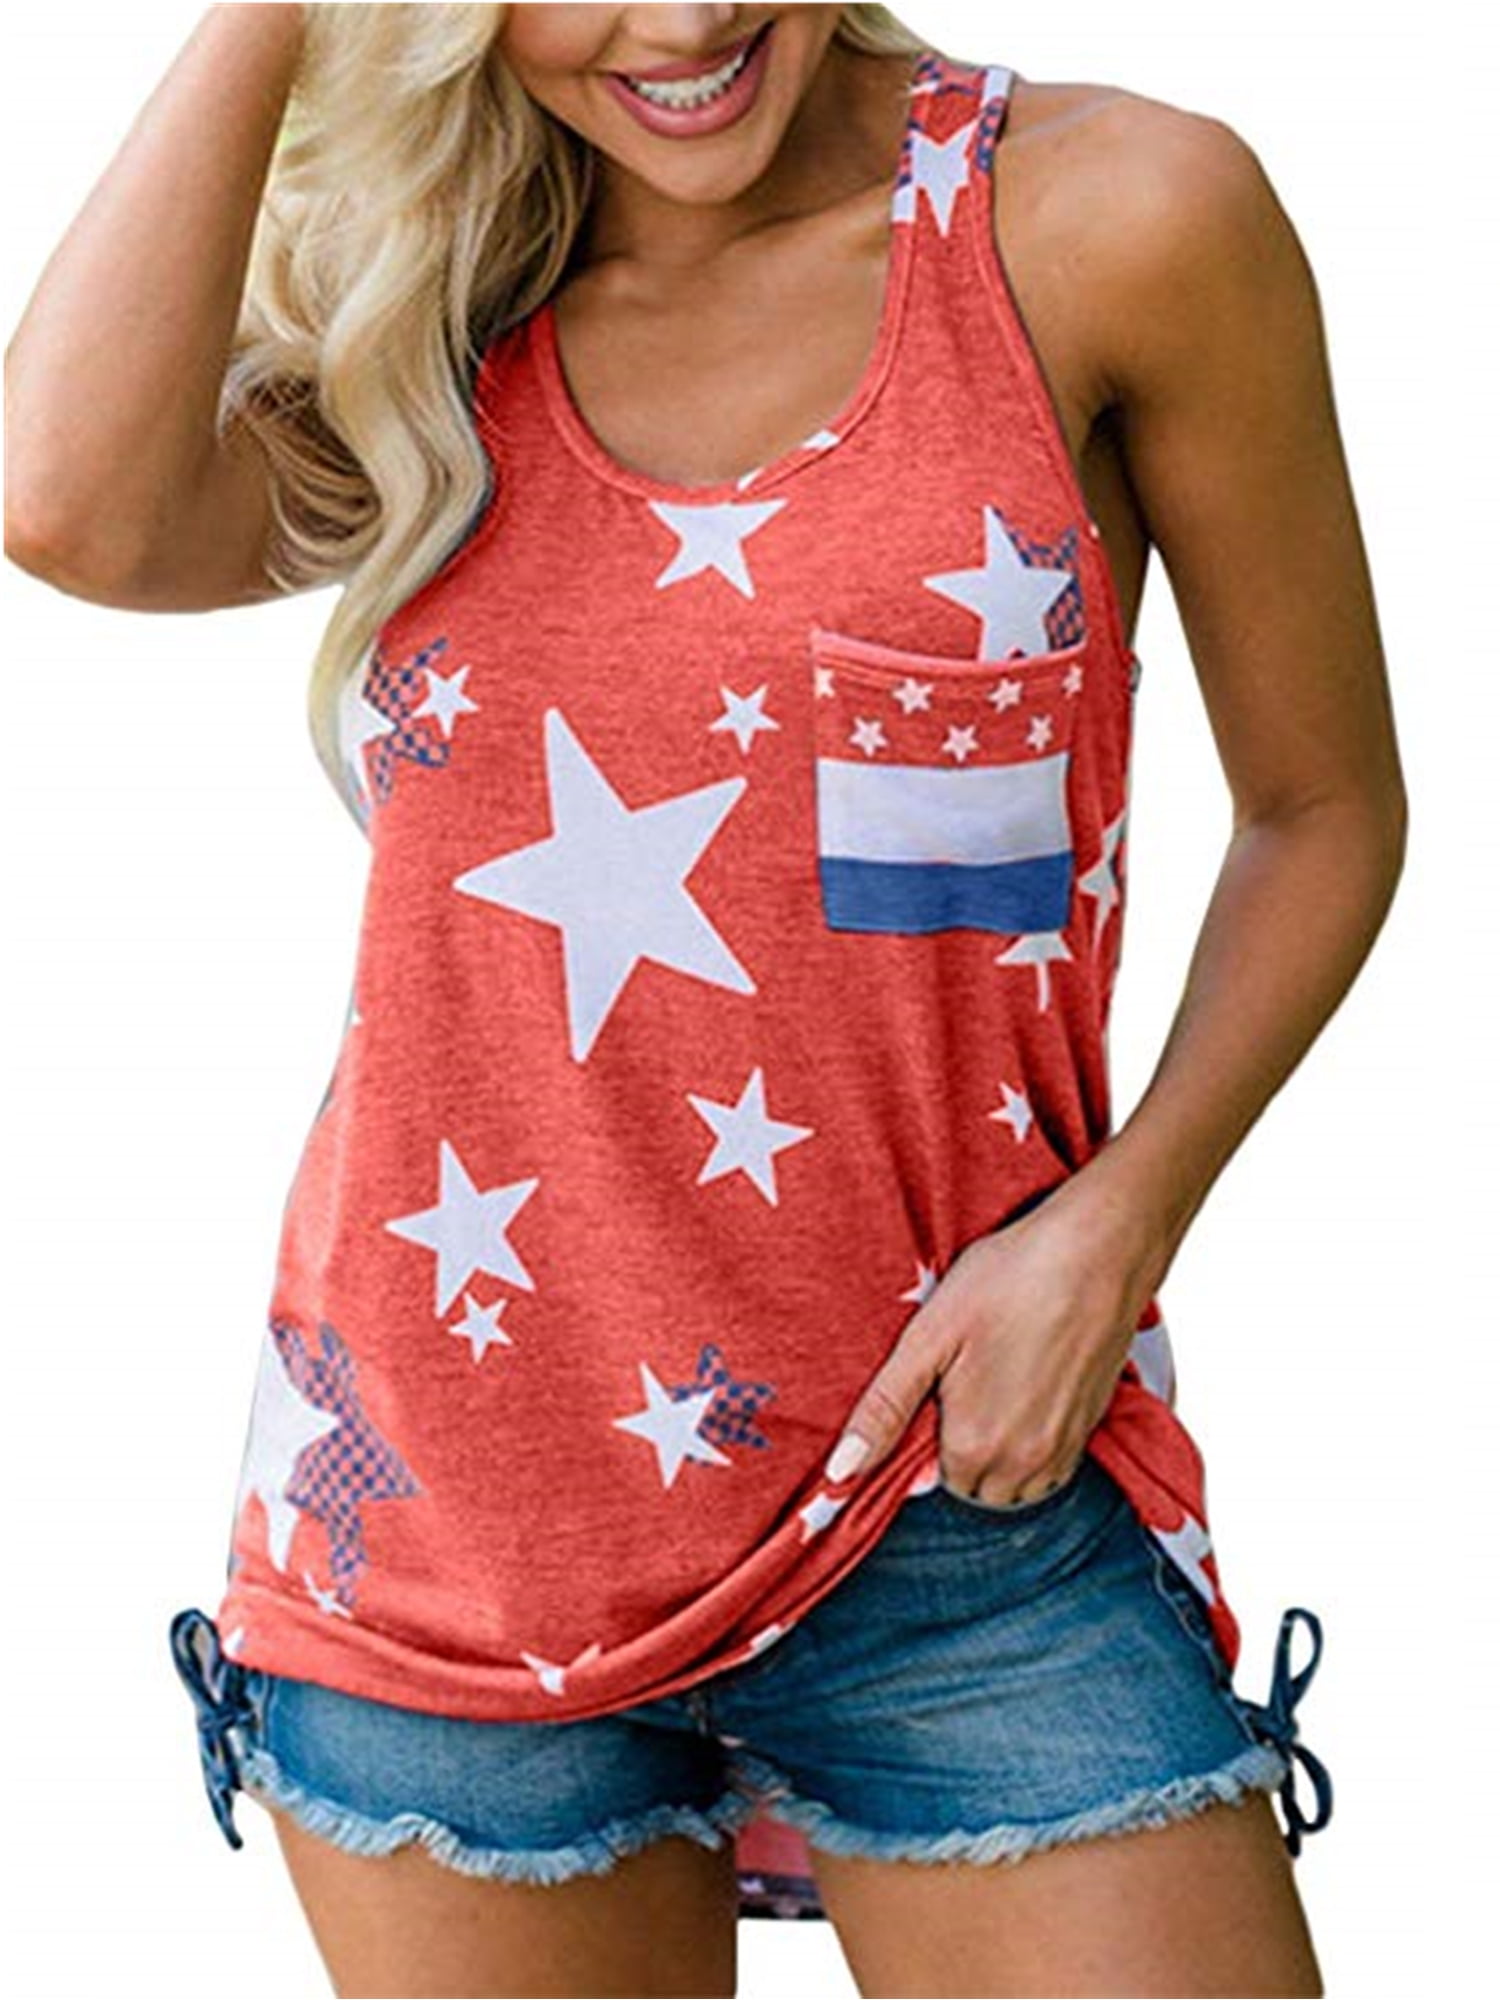 Independence Day 4th of July Patriotic Vaccinated wblue box flag -Unisex Tank Top